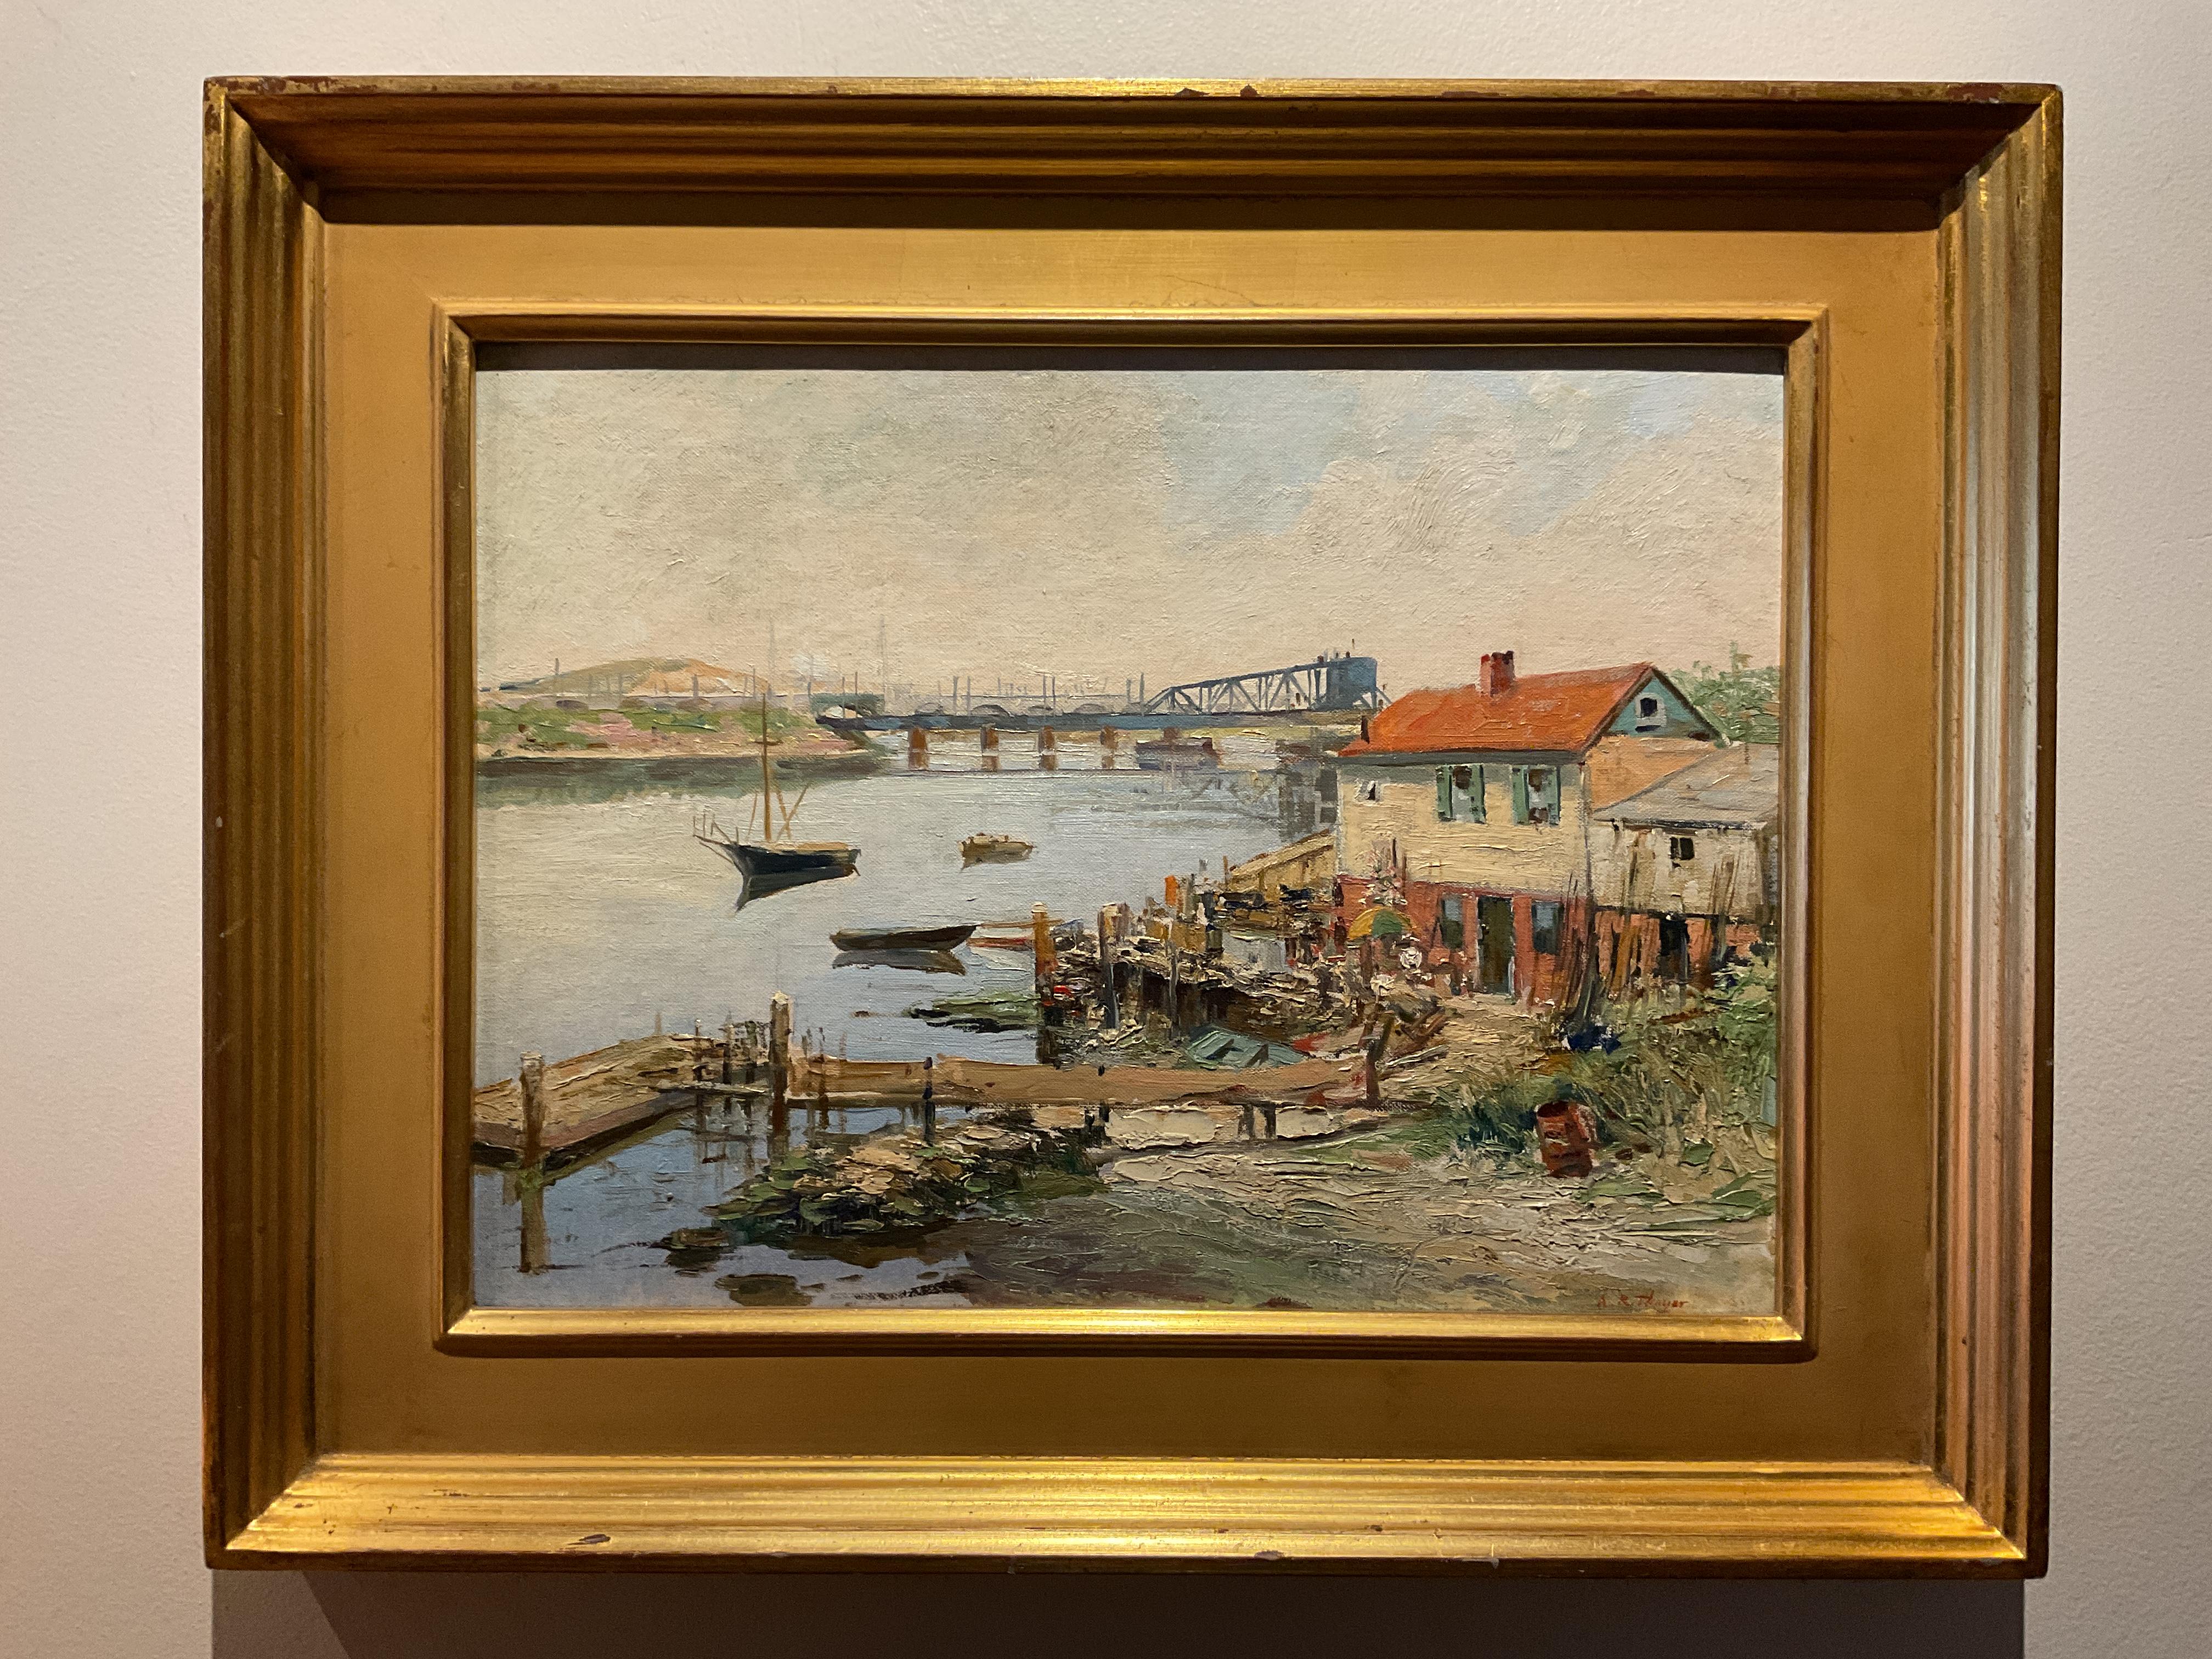 Albert Rufus Thayer Landscape Painting - Vintage Harbor Scene, Oil on Board Possibly Cape Cod by Albert R Thayer, ca 1950